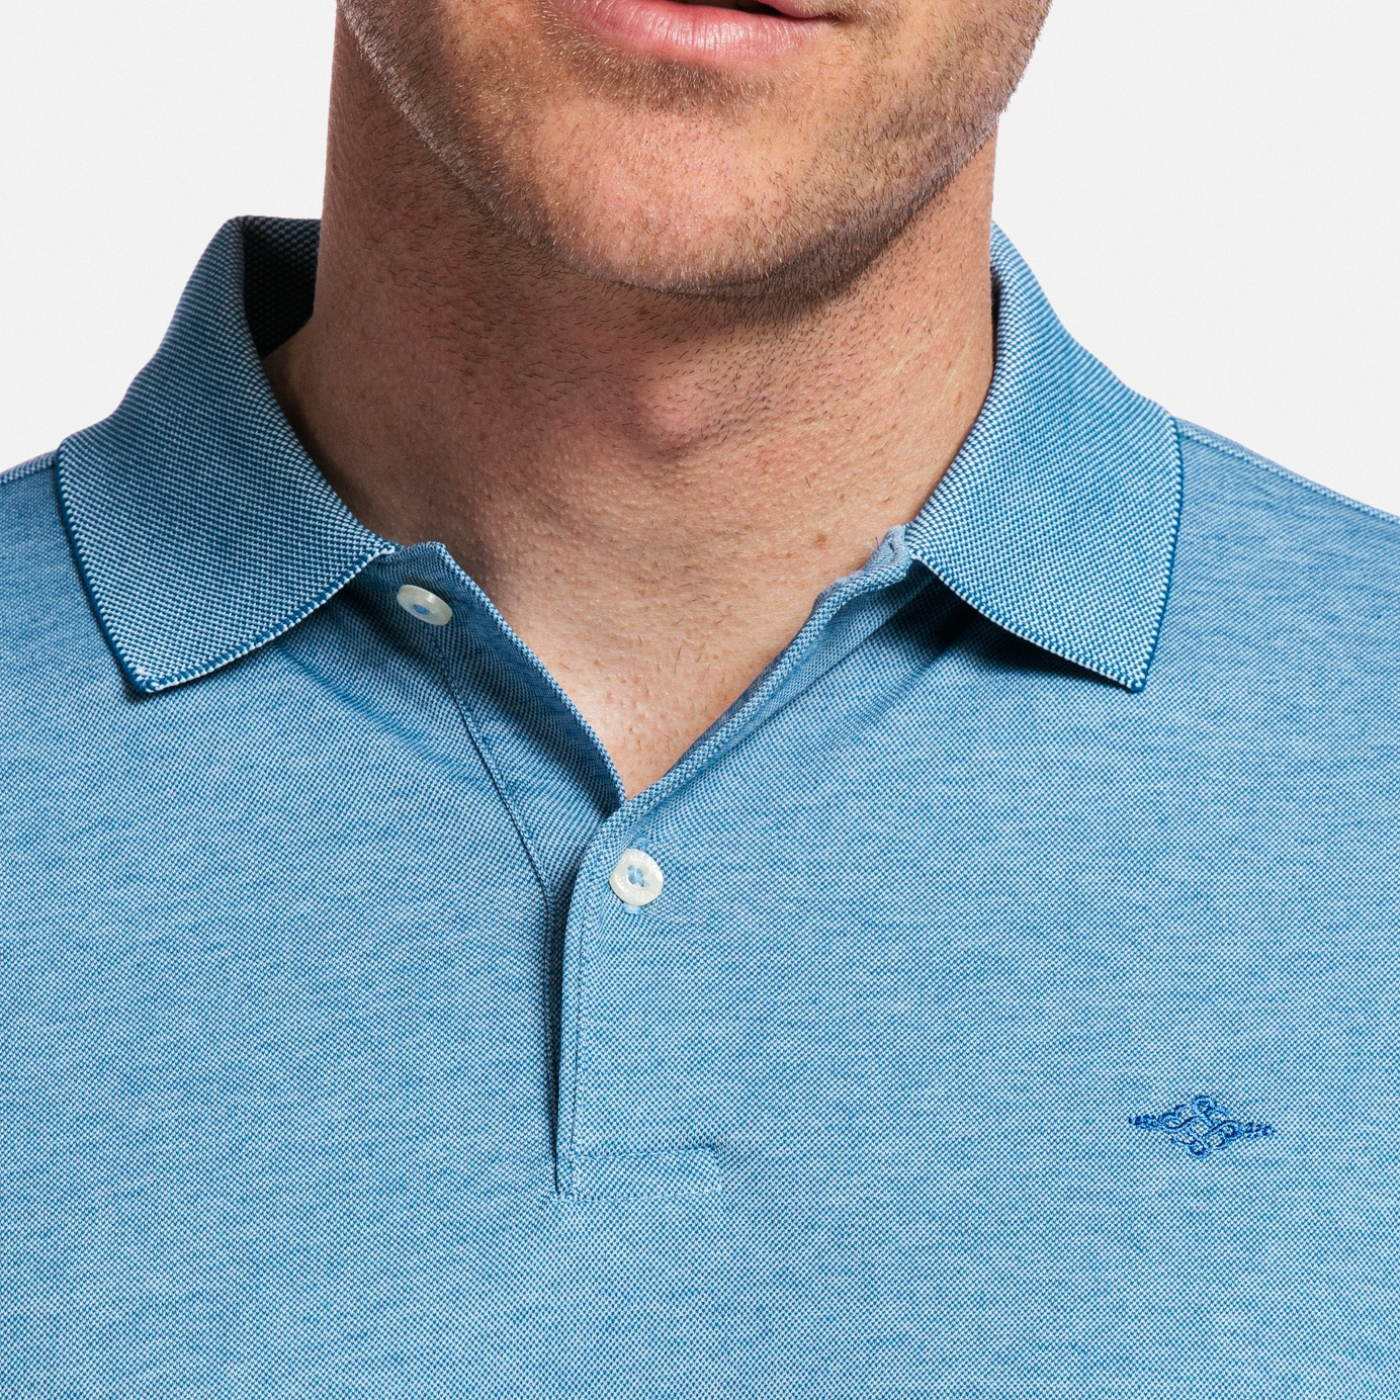 Button Detail of Polo Shirt on Model 